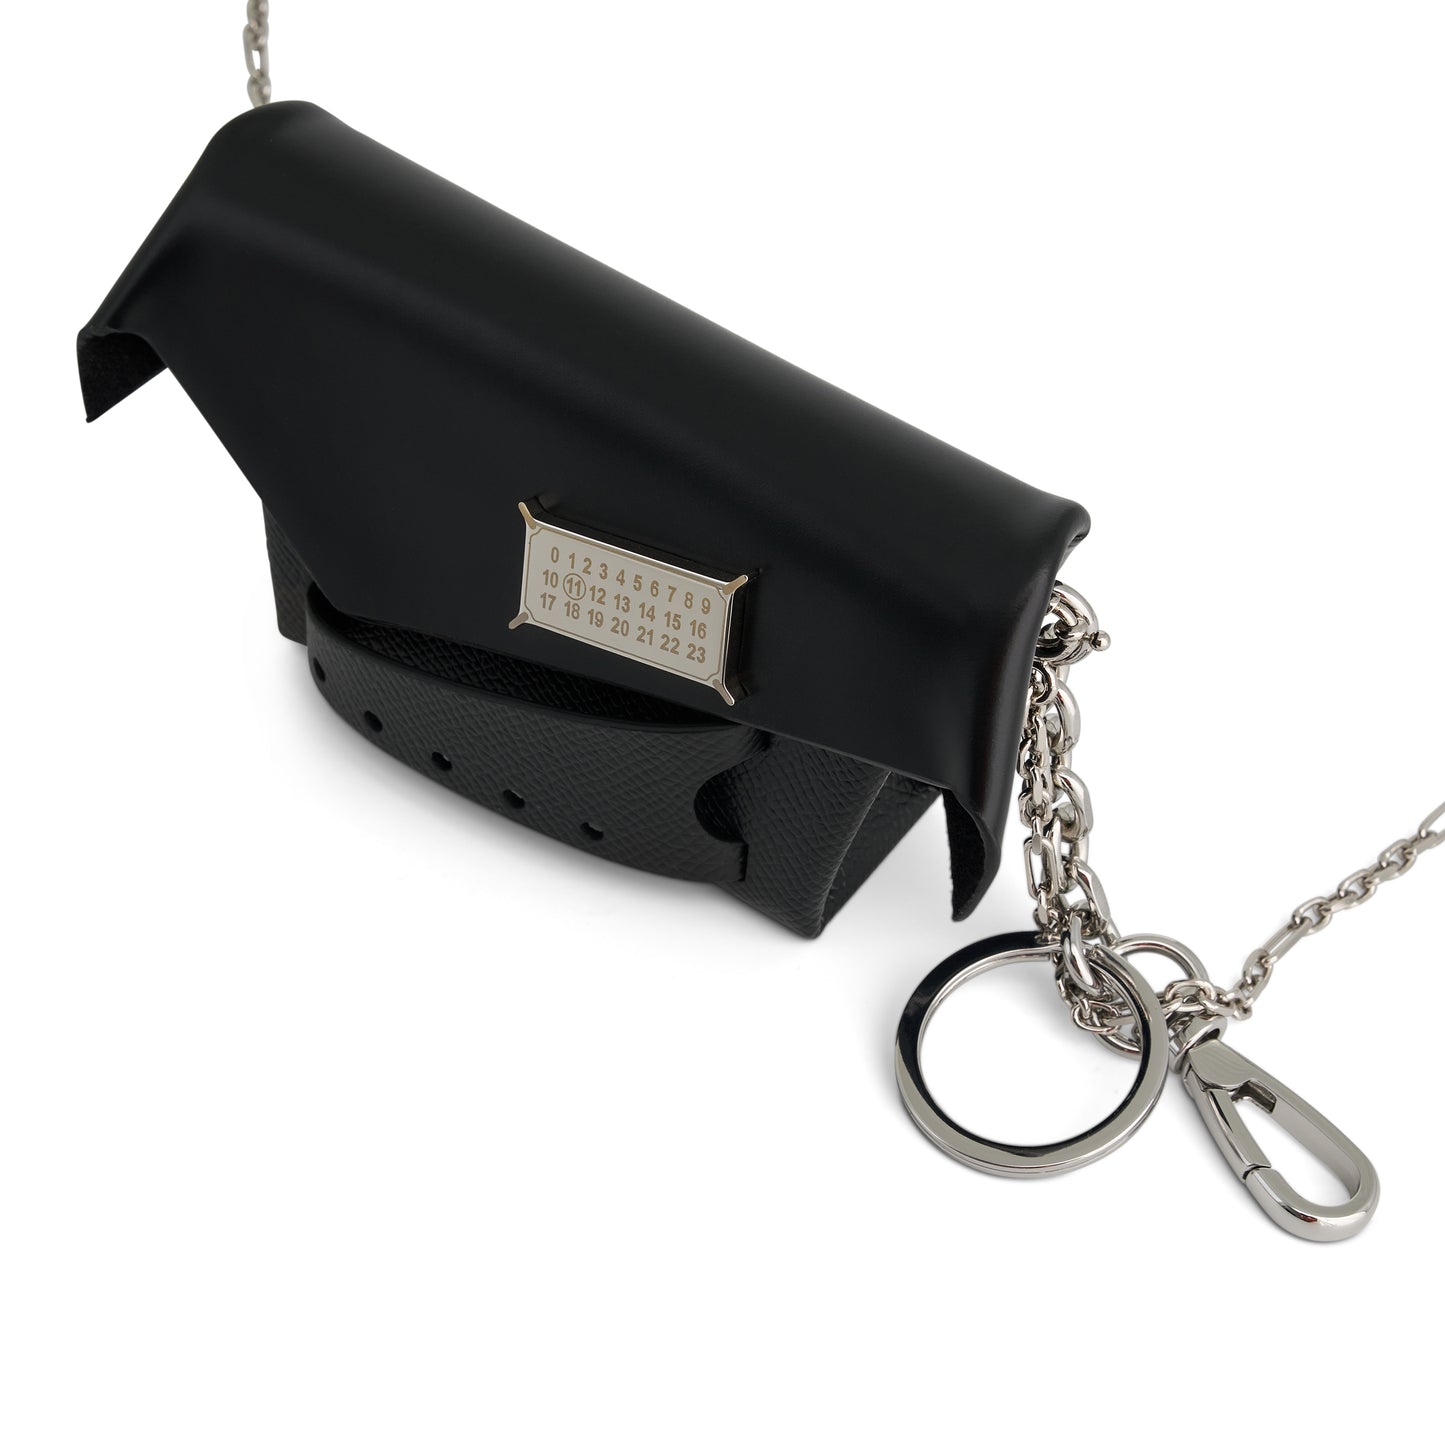 Maison Margiela Small Snatched Bag in Black